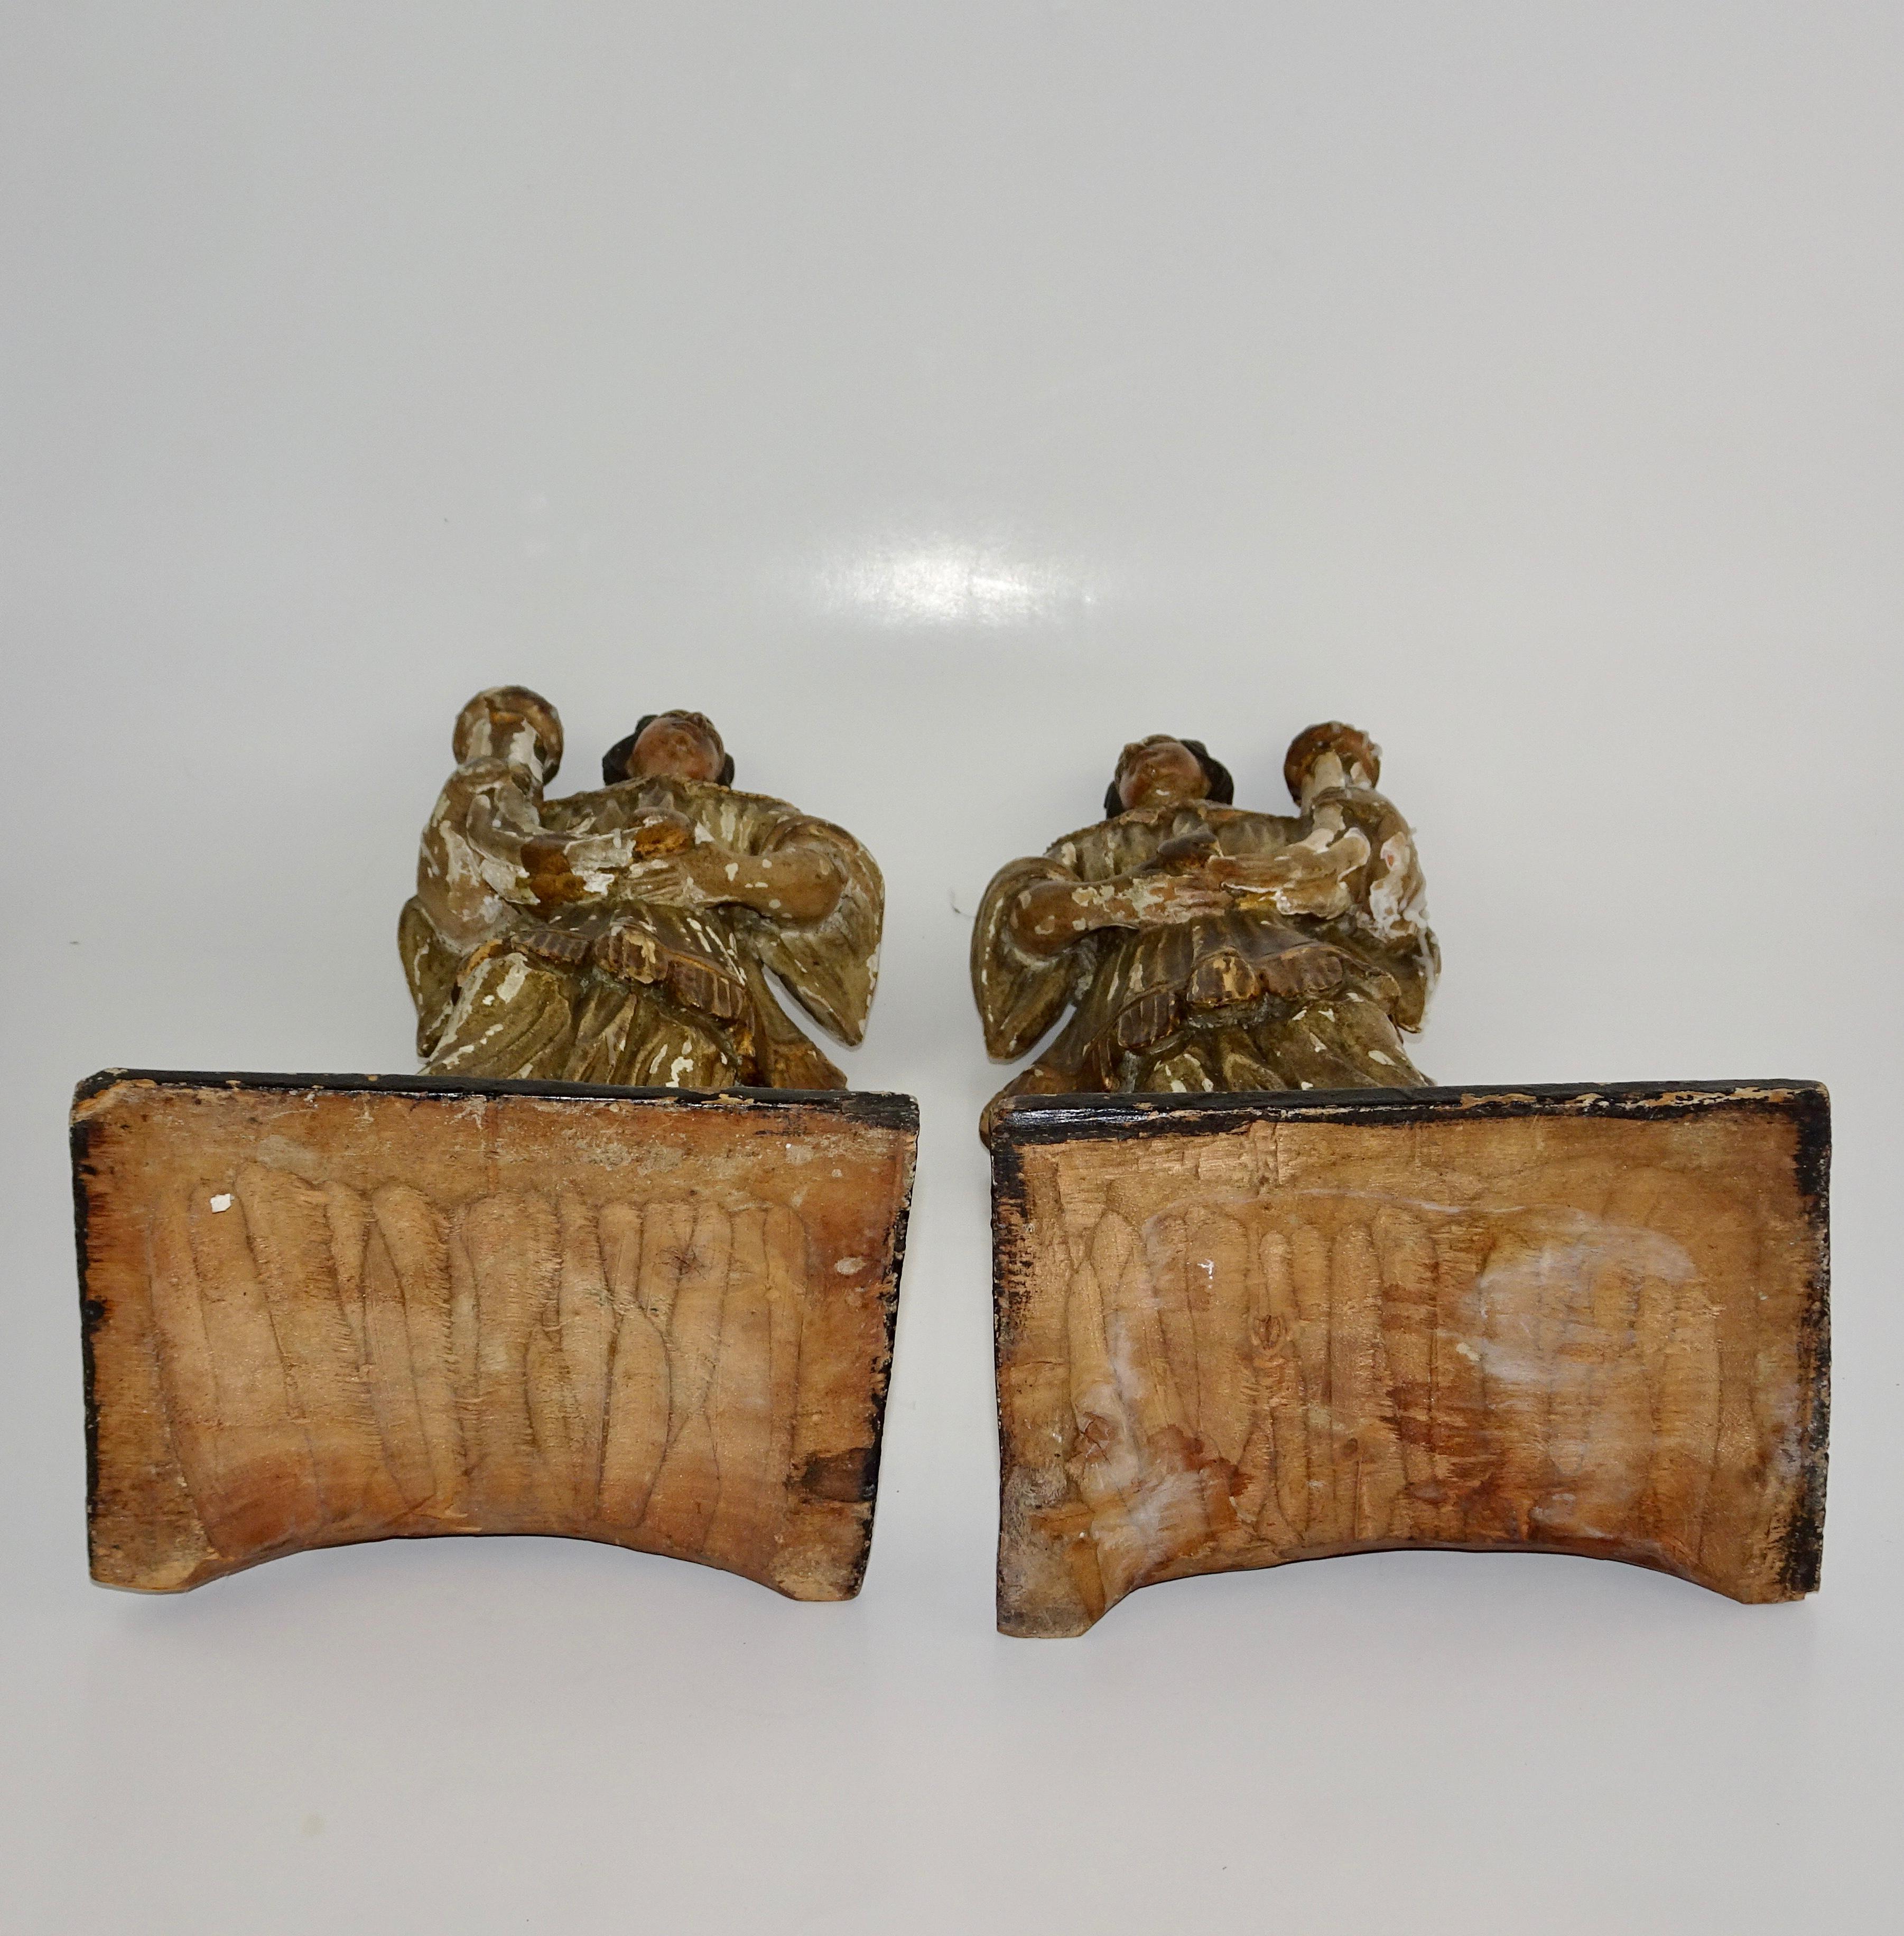 Pair of 18th century wood carved Italian figures of angels holding candleholders. The figures stand on a square base and one is holding to the left and one is holding to the right. They are painted and gilt.